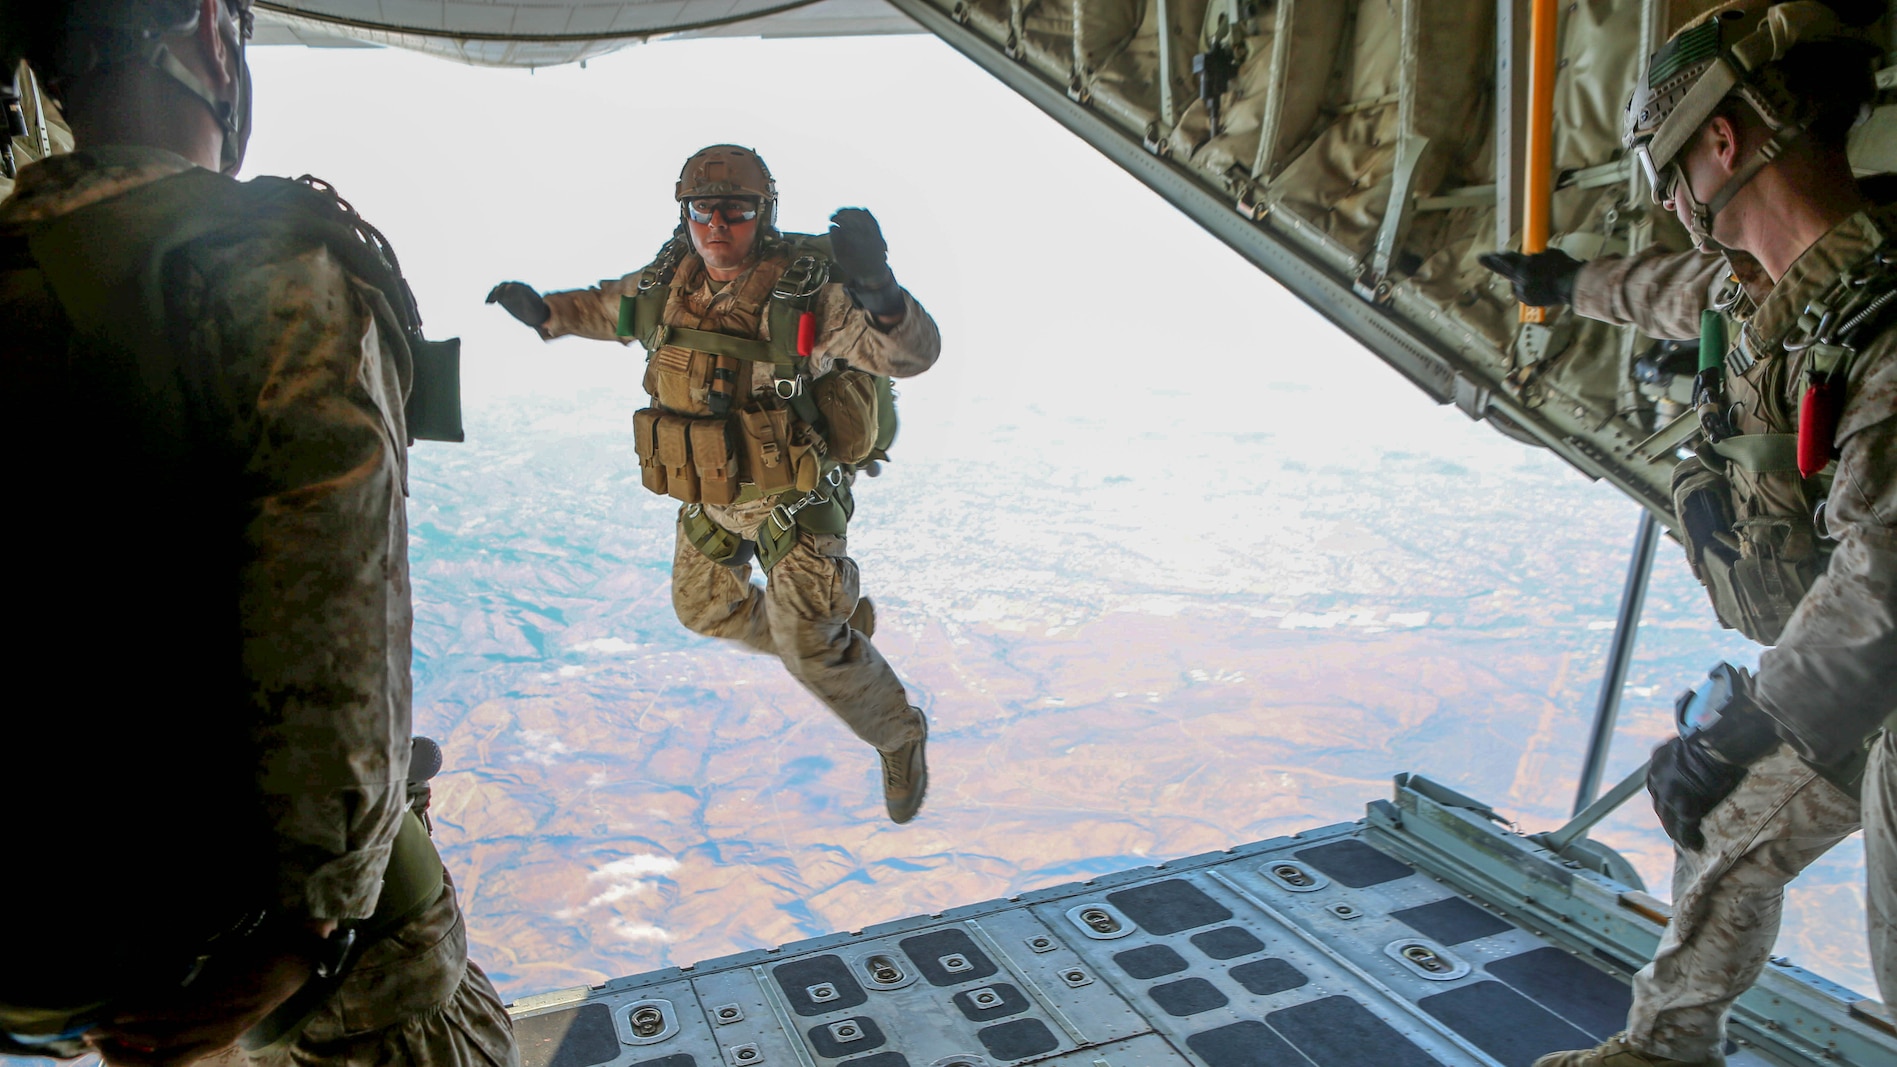 Marines with 1st Reconnaissance Battalion, 1st Marine Division conduct free fall jump training from a C-130 Hercules with 3rd Marine Aircraft Wing aboard Marine Corps Base Camp Pendleton, Calif., Oct. 16, 2015. 1st Recon conducted parachute operations in preparation for future deployments. 